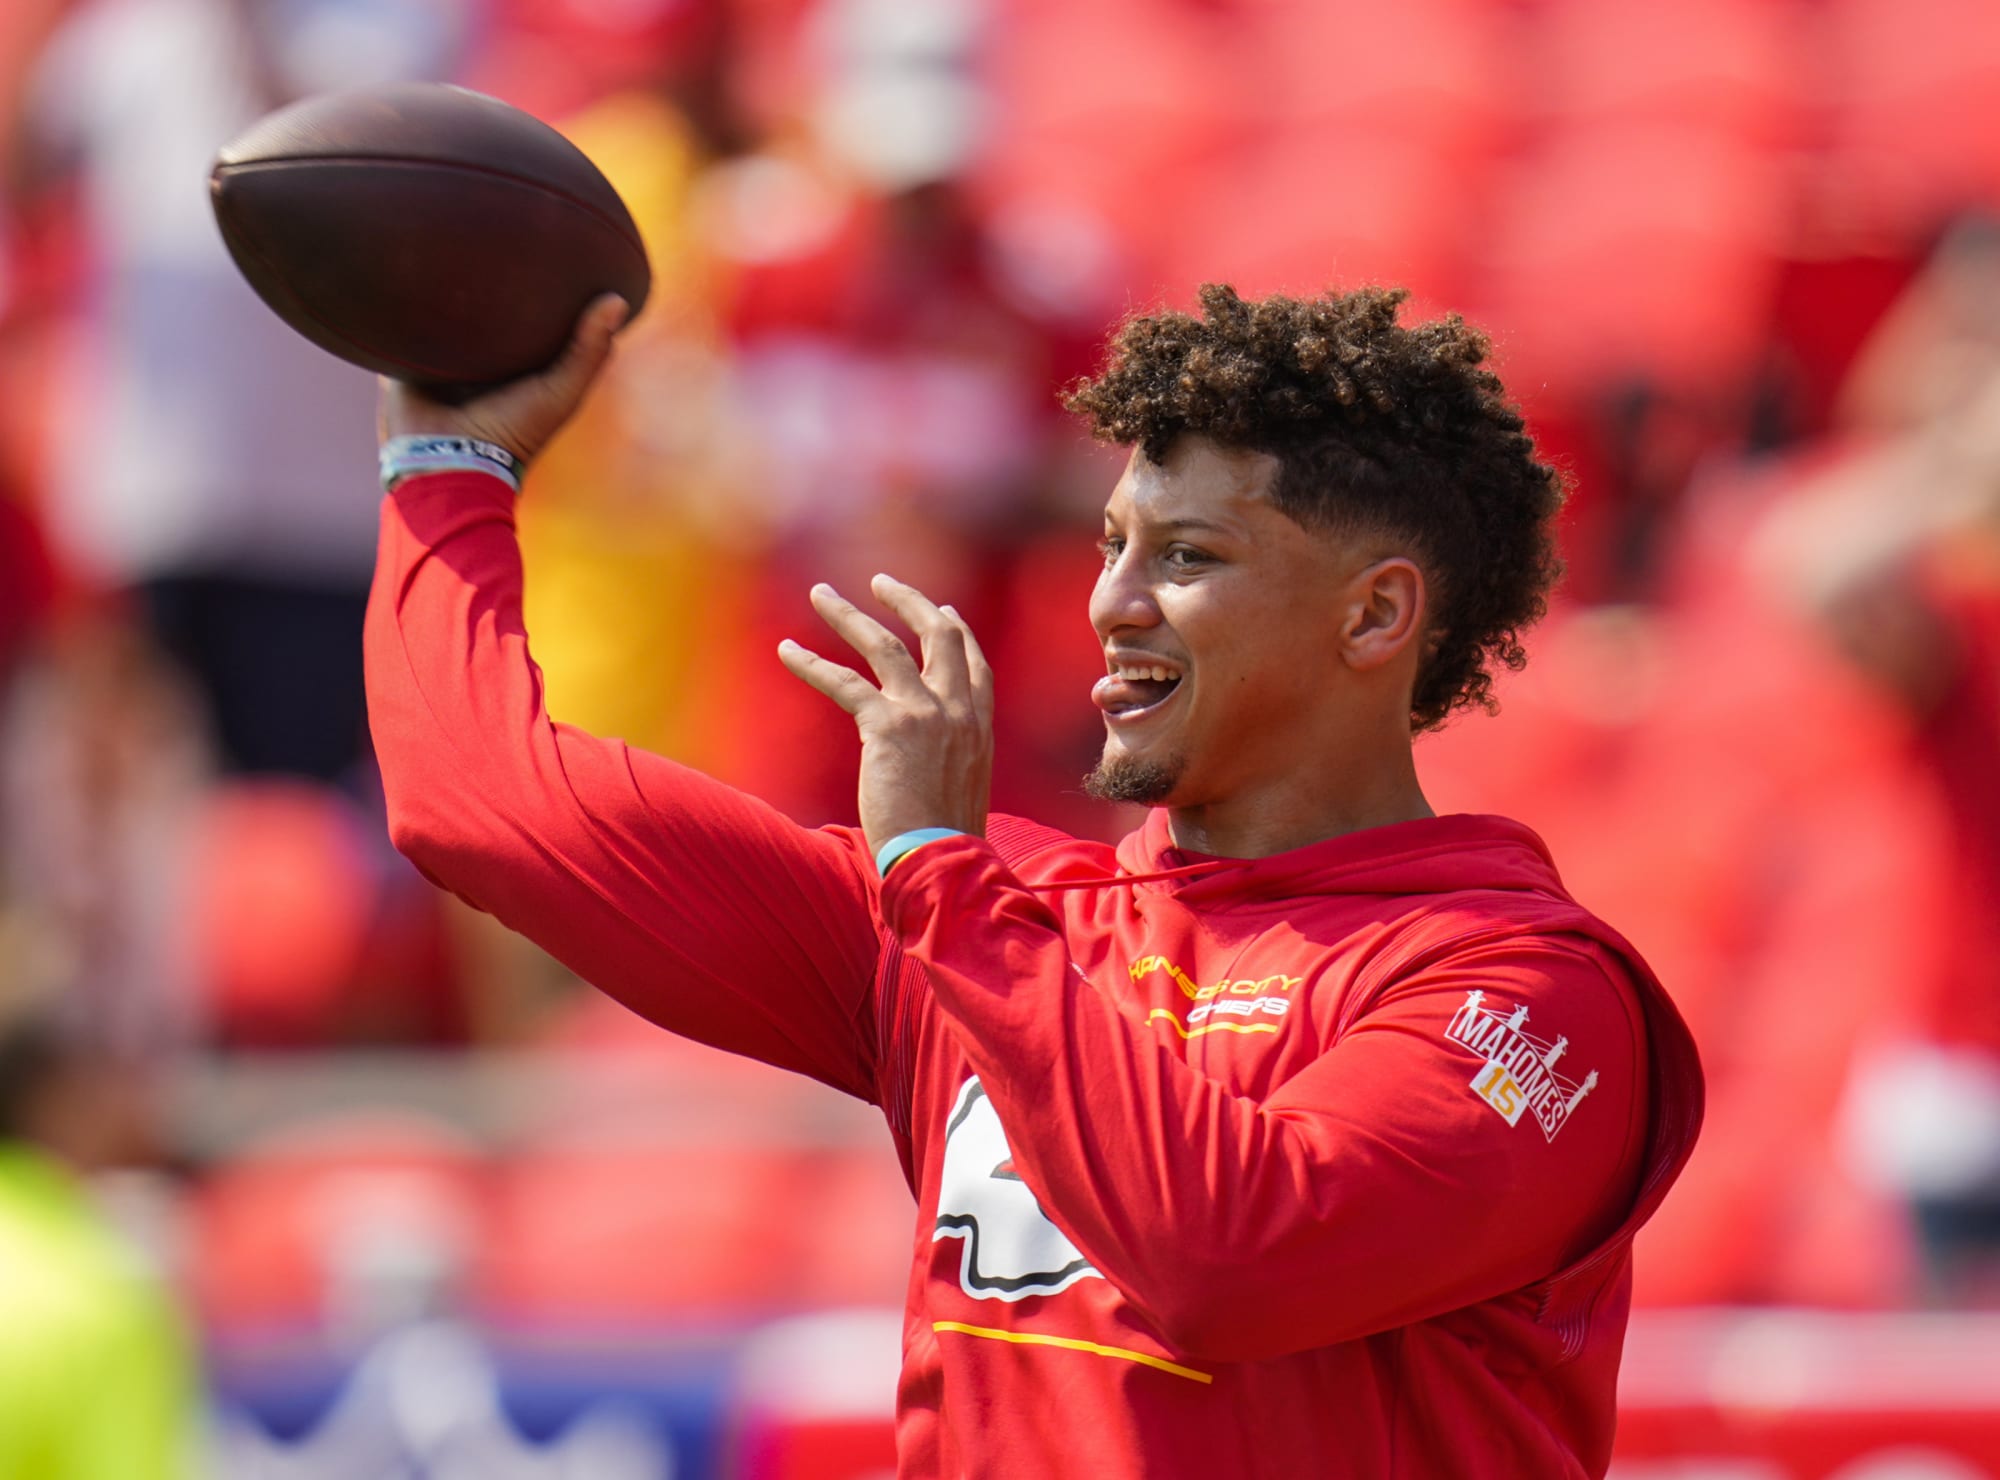 Patrick Mahomes sets NFL record for most passing yards through 50 games